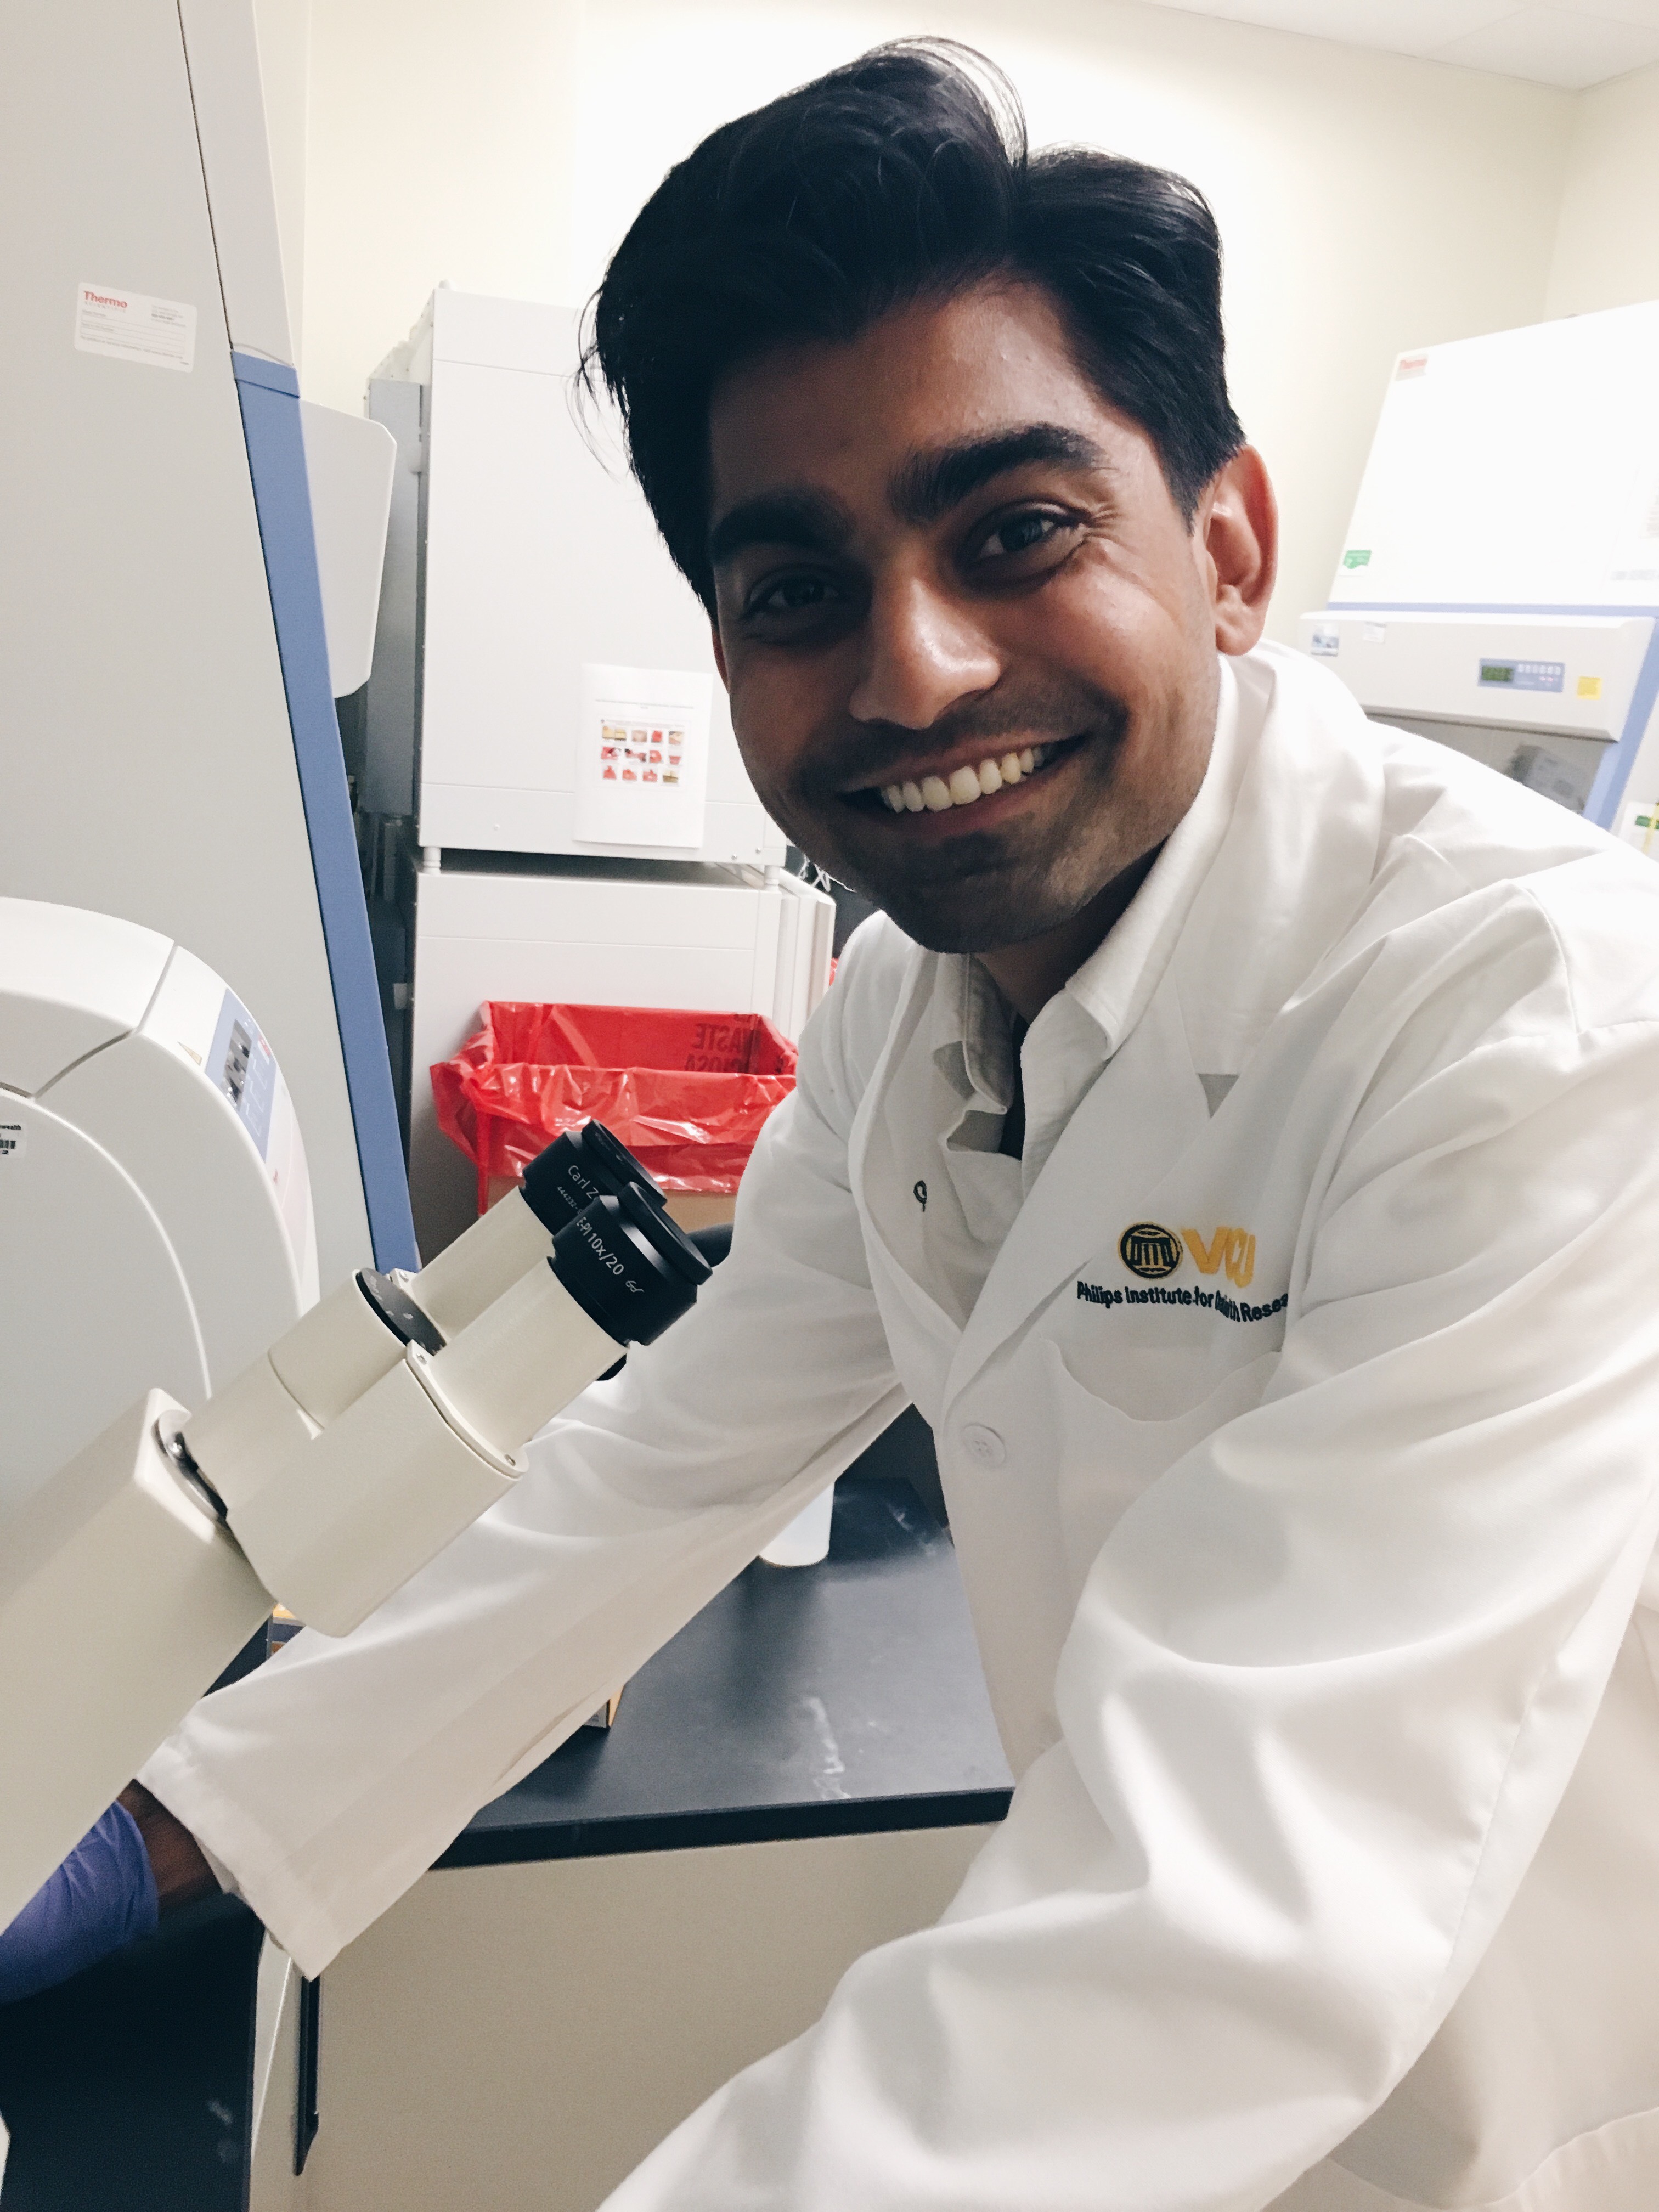 Maninderjit Ghotra battled pediatric cancer in the research lab of Anthony Faber, Ph.D., in VCU’s Institute of Molecular Medicine.